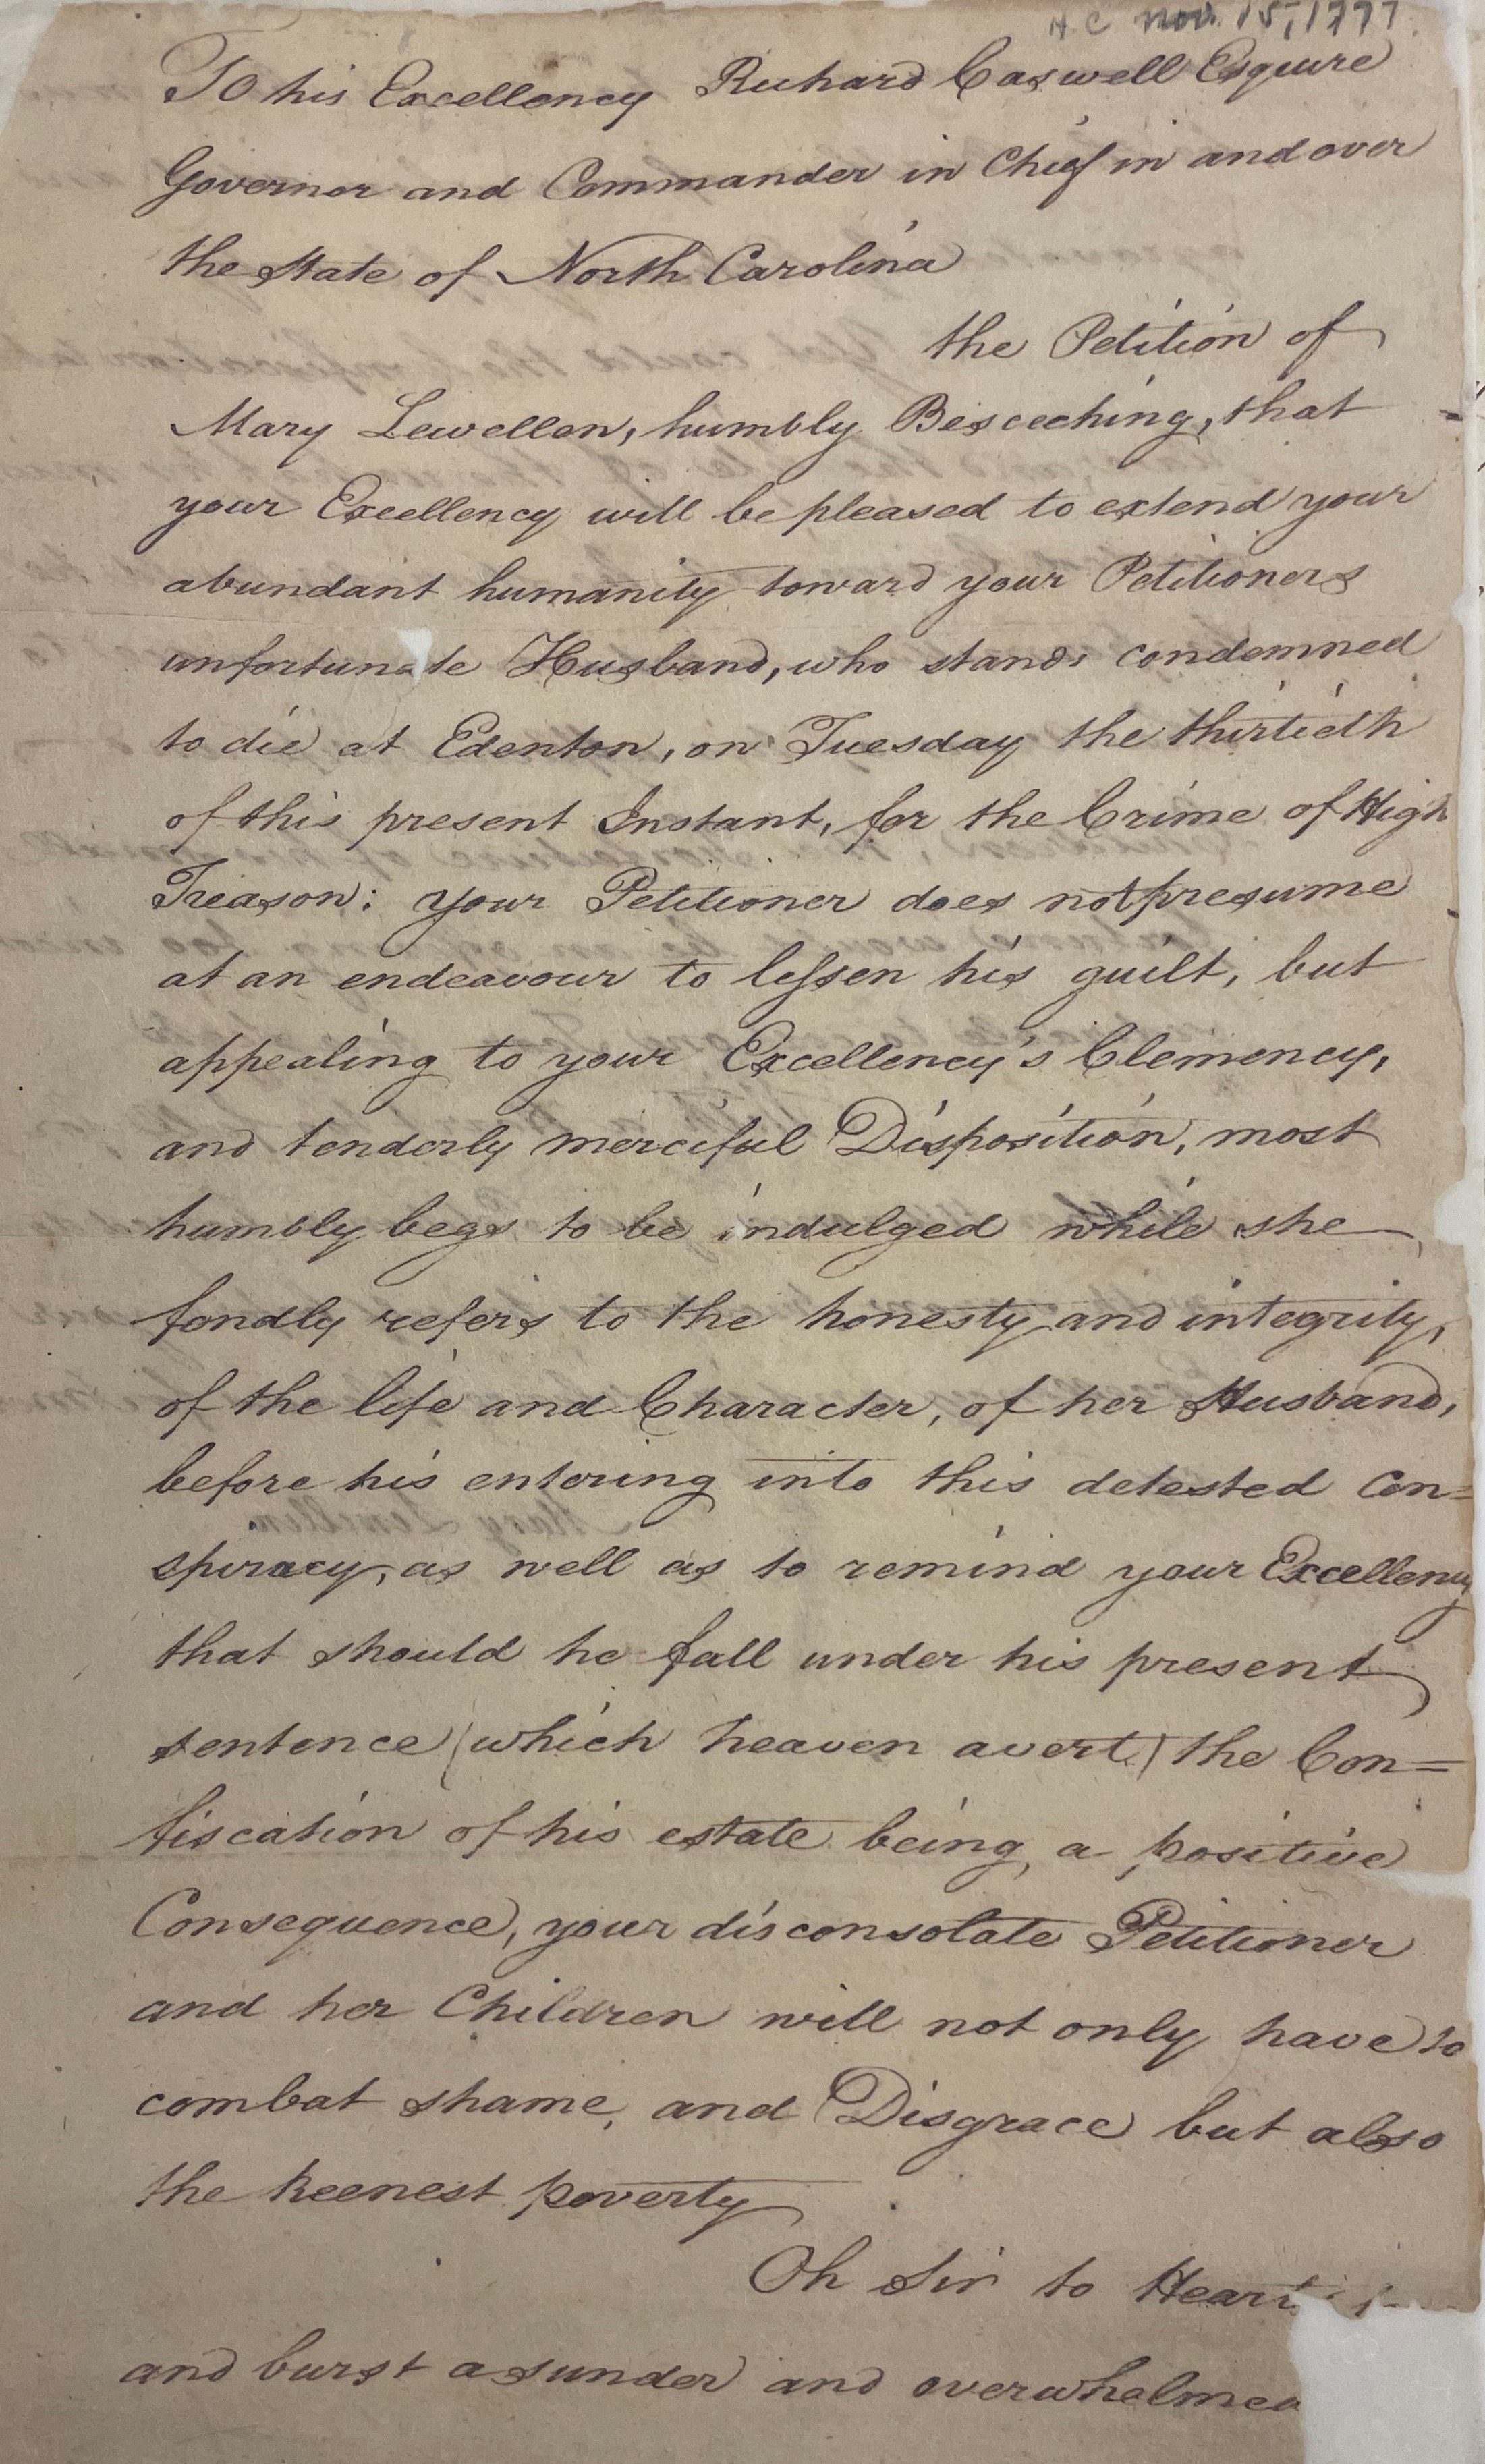 Handwritten petition from Mary Lewellen to Richard Caswell